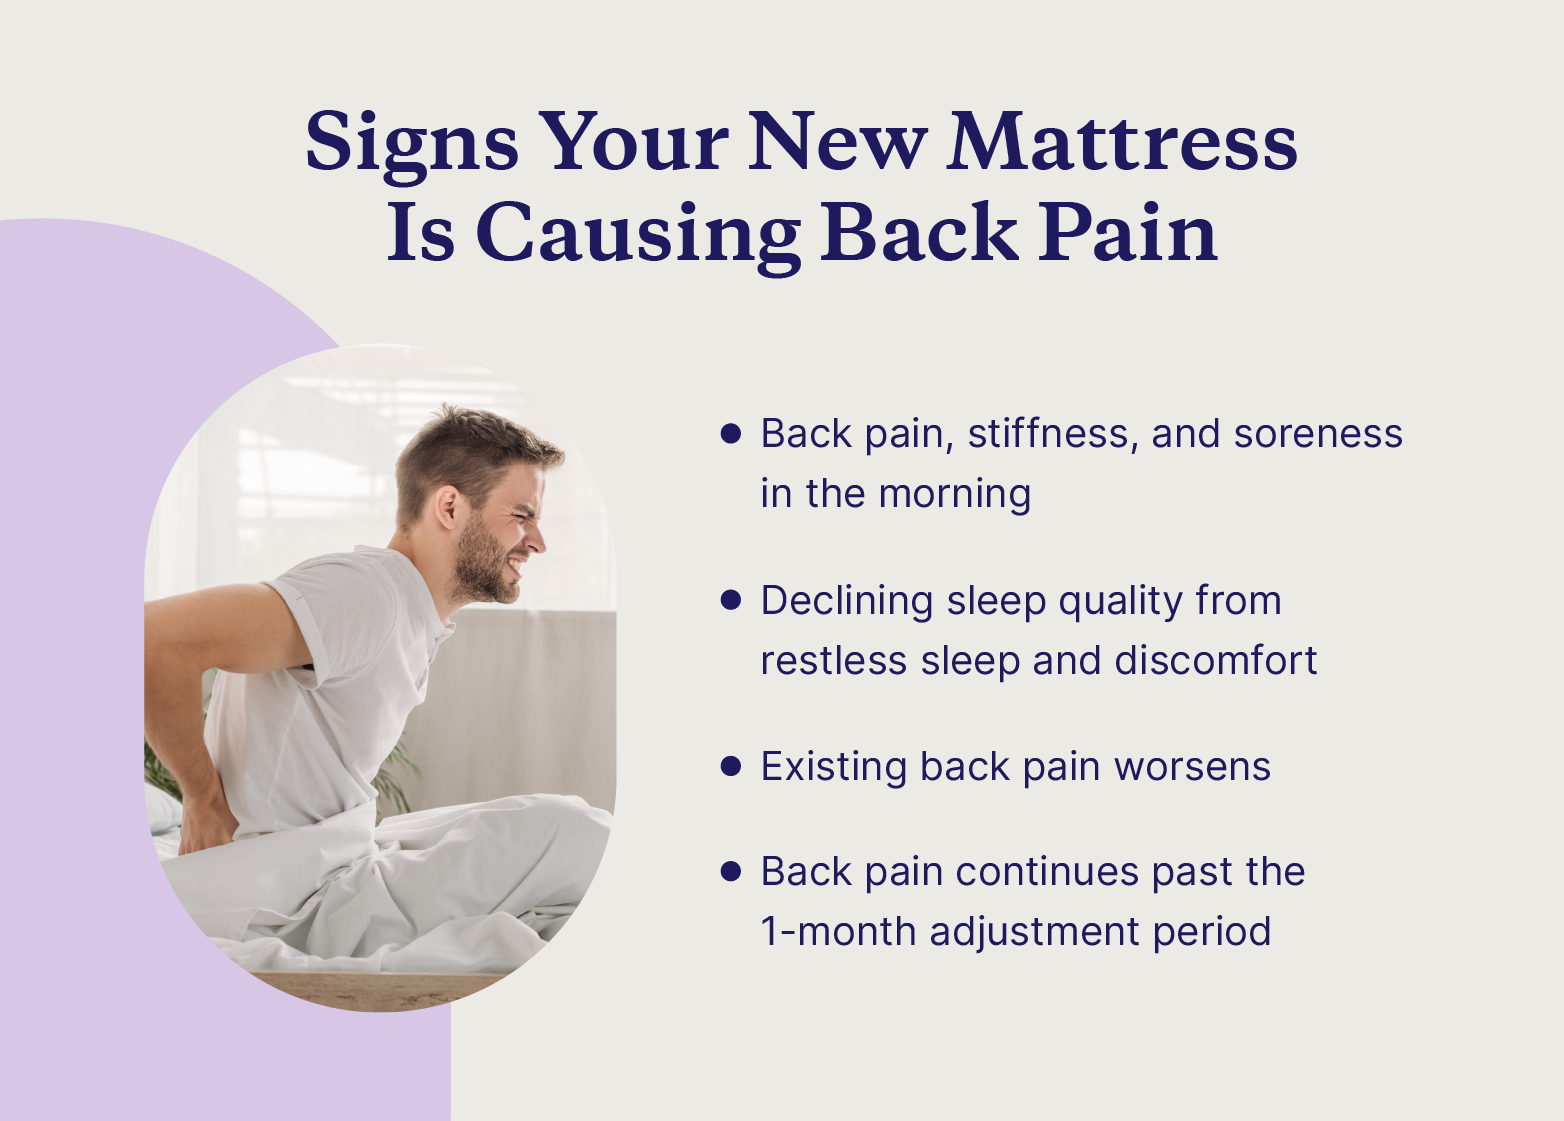 A man winces and rubs his lower back alongside four signs of new mattress back pain.